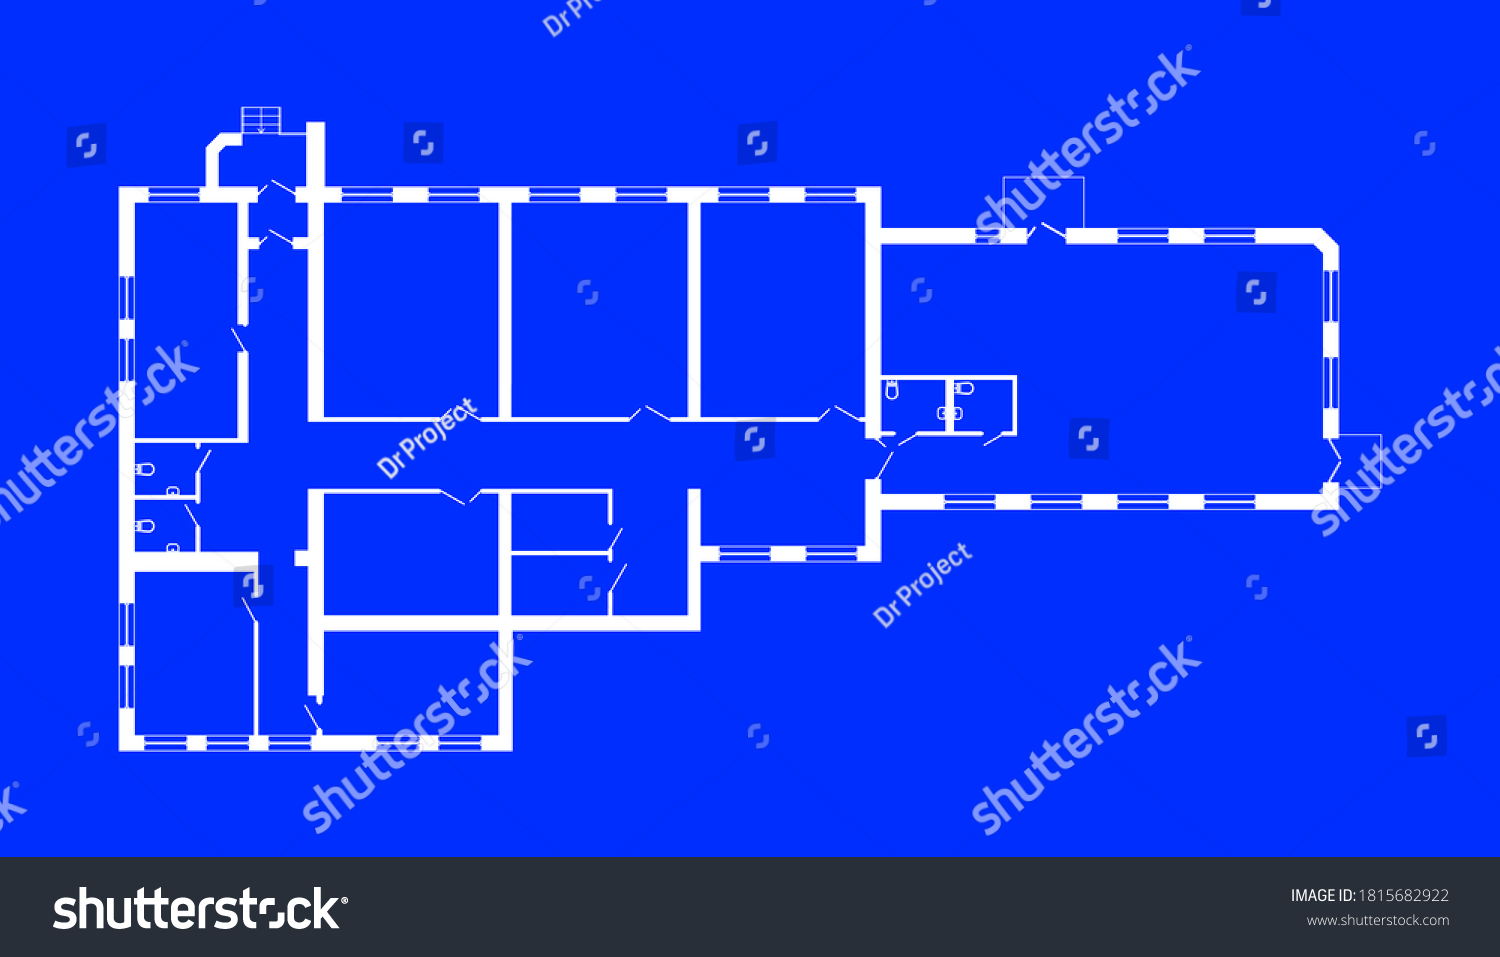 Modern office floor plan without furniture for your design. Vector  blueprint. Architectural background.  #1815682922